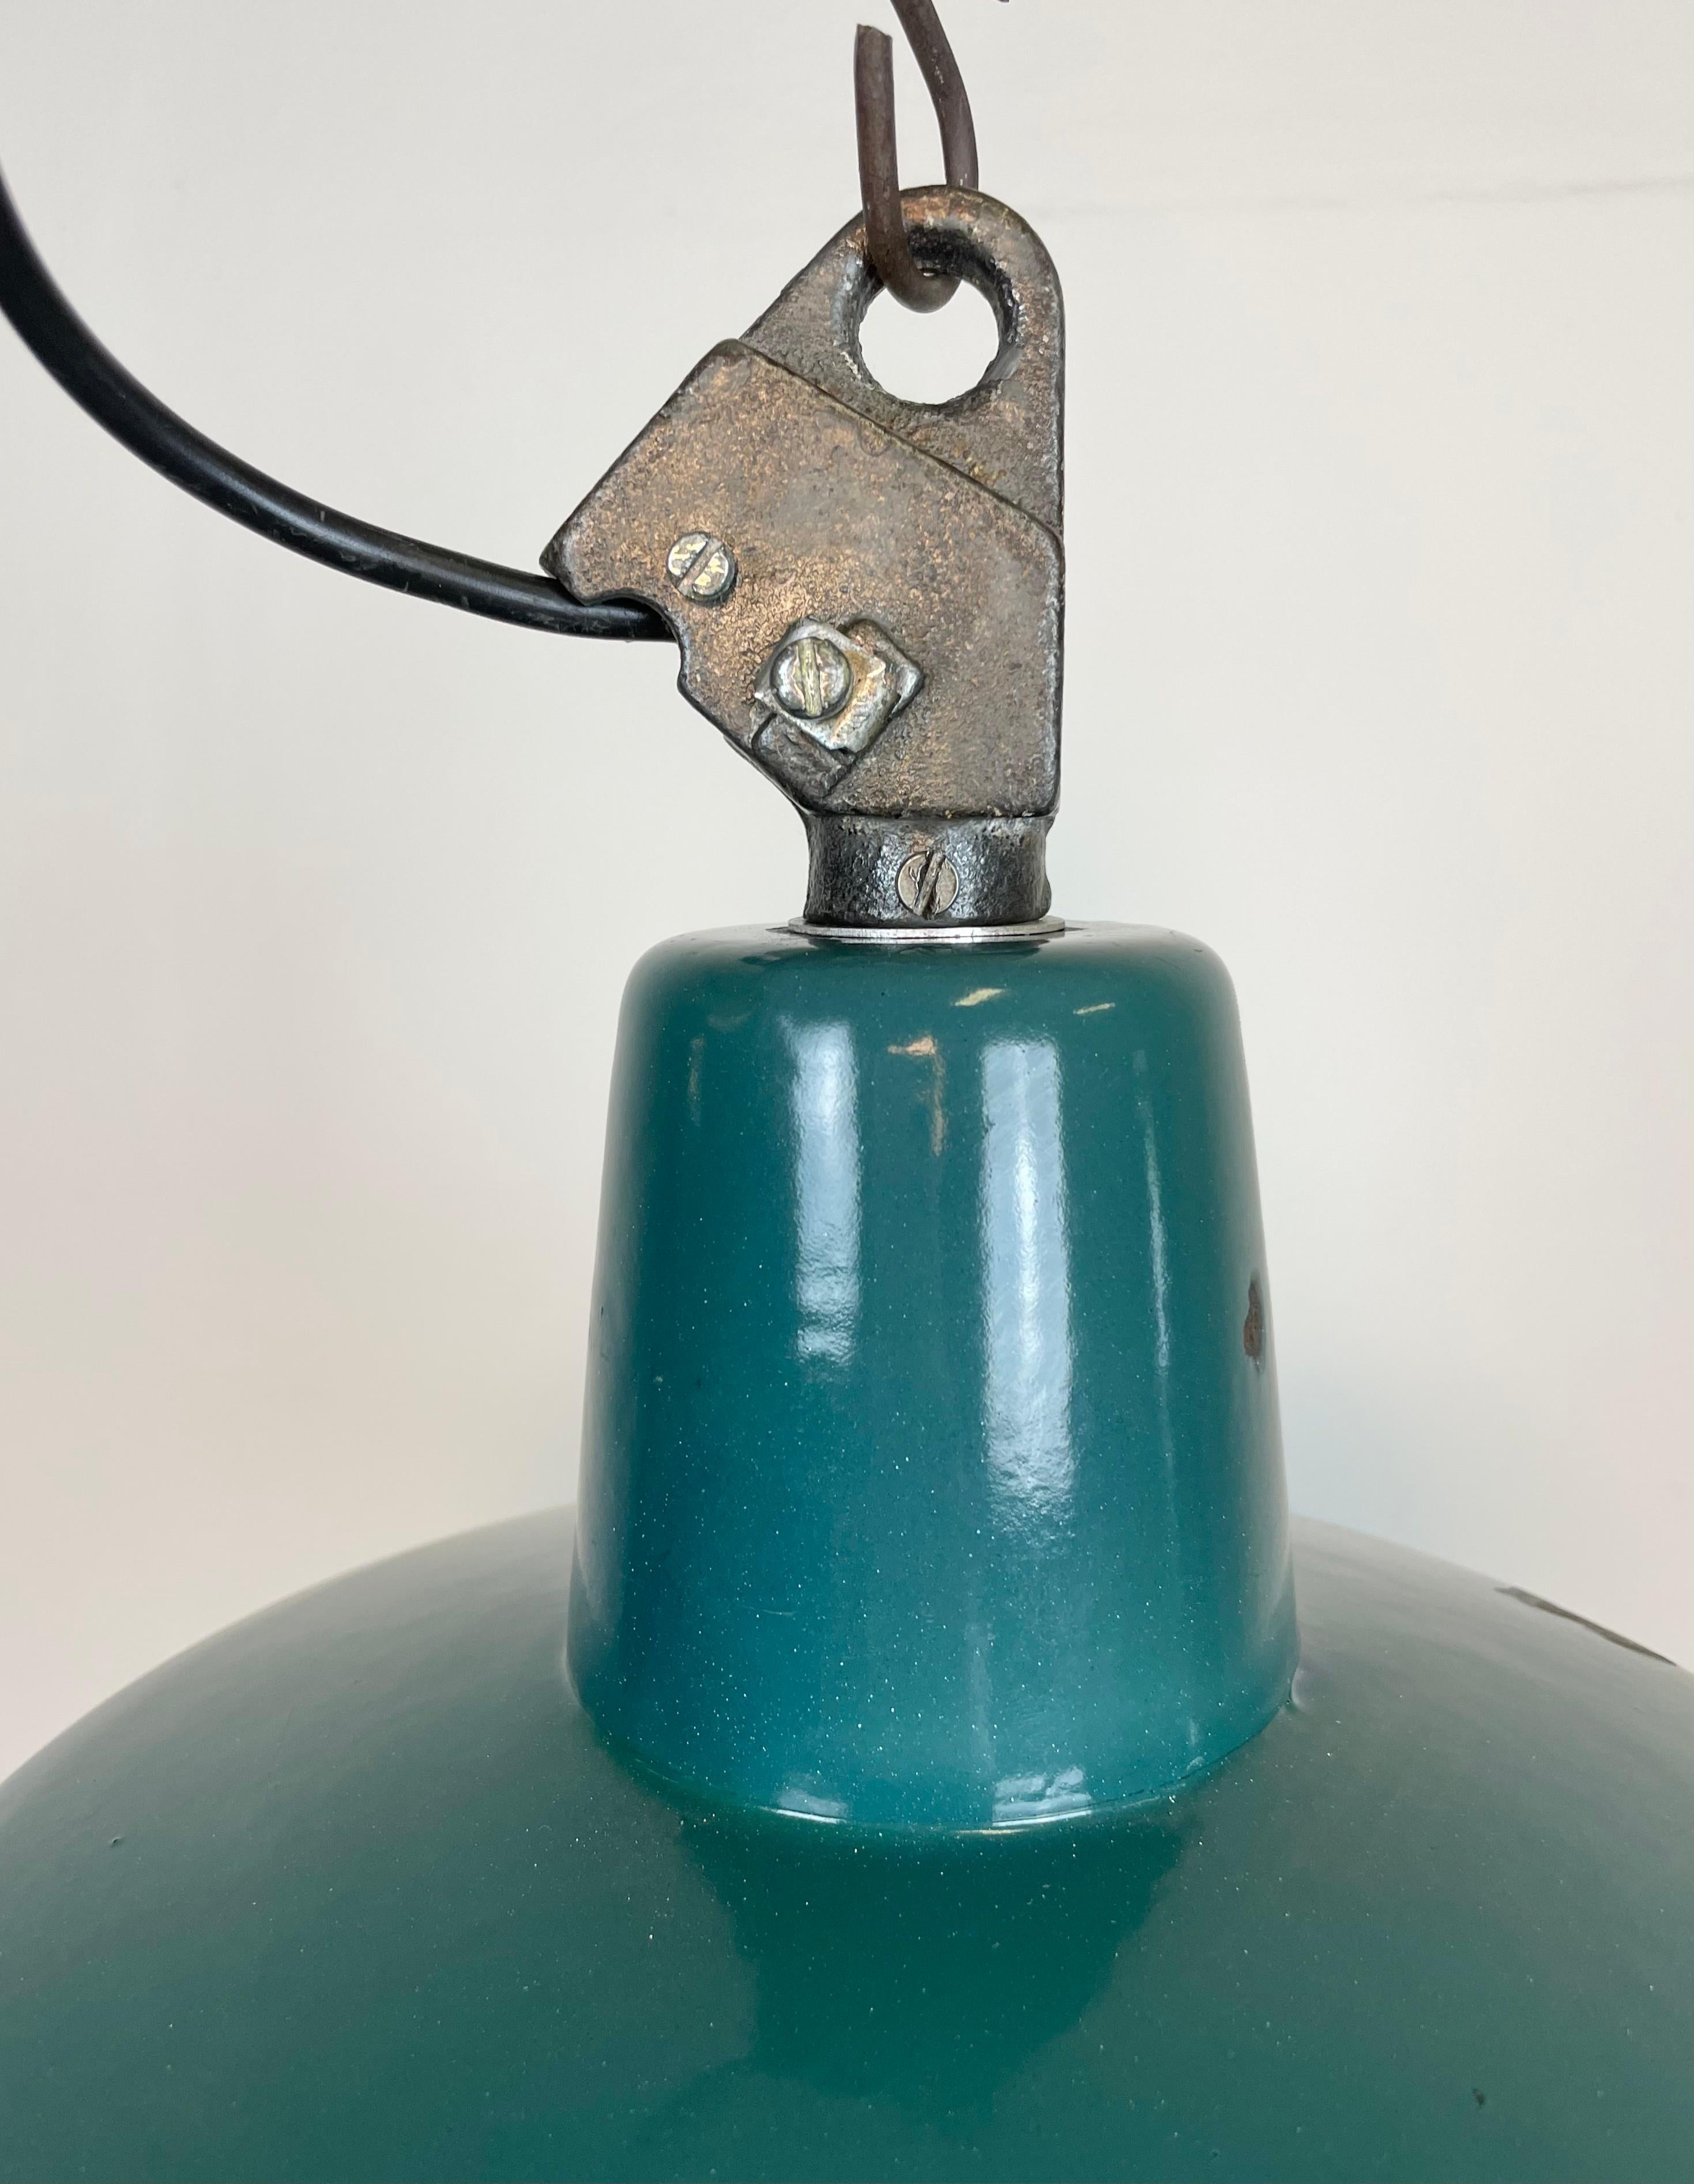 Industrial green enamel pendant light made by Polam Wilkasy in Poland during the 1960s. White enamel inside the shade. Cast iron top. The porcelain socket requires E 27/ E 26 light bulbs. New wire. Fully functional. The weight of the lamp is 1,5 kg.